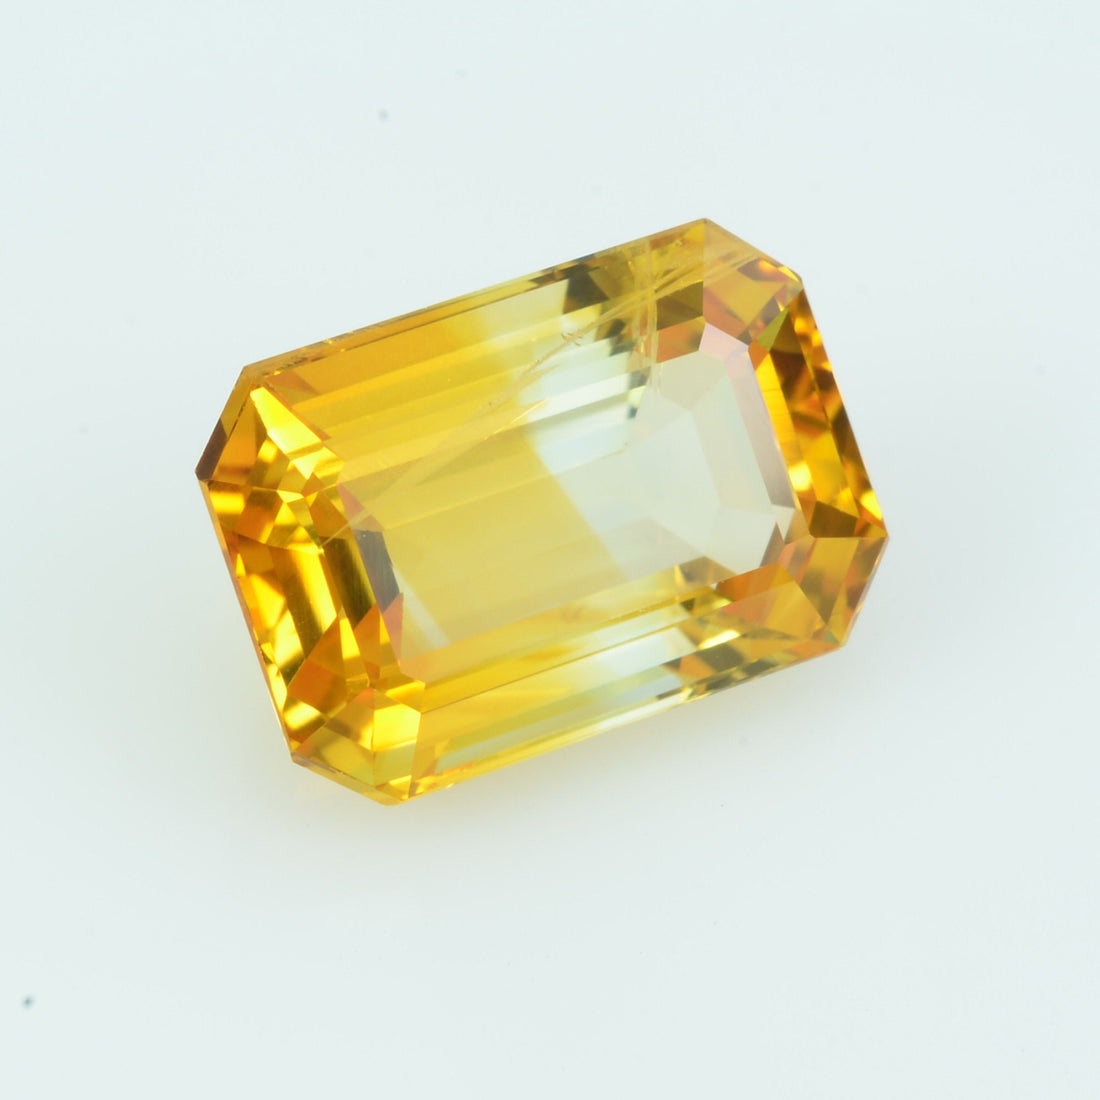 4.84 cts Natural Yellow Sapphire Loose Gemstone Octagon Cut